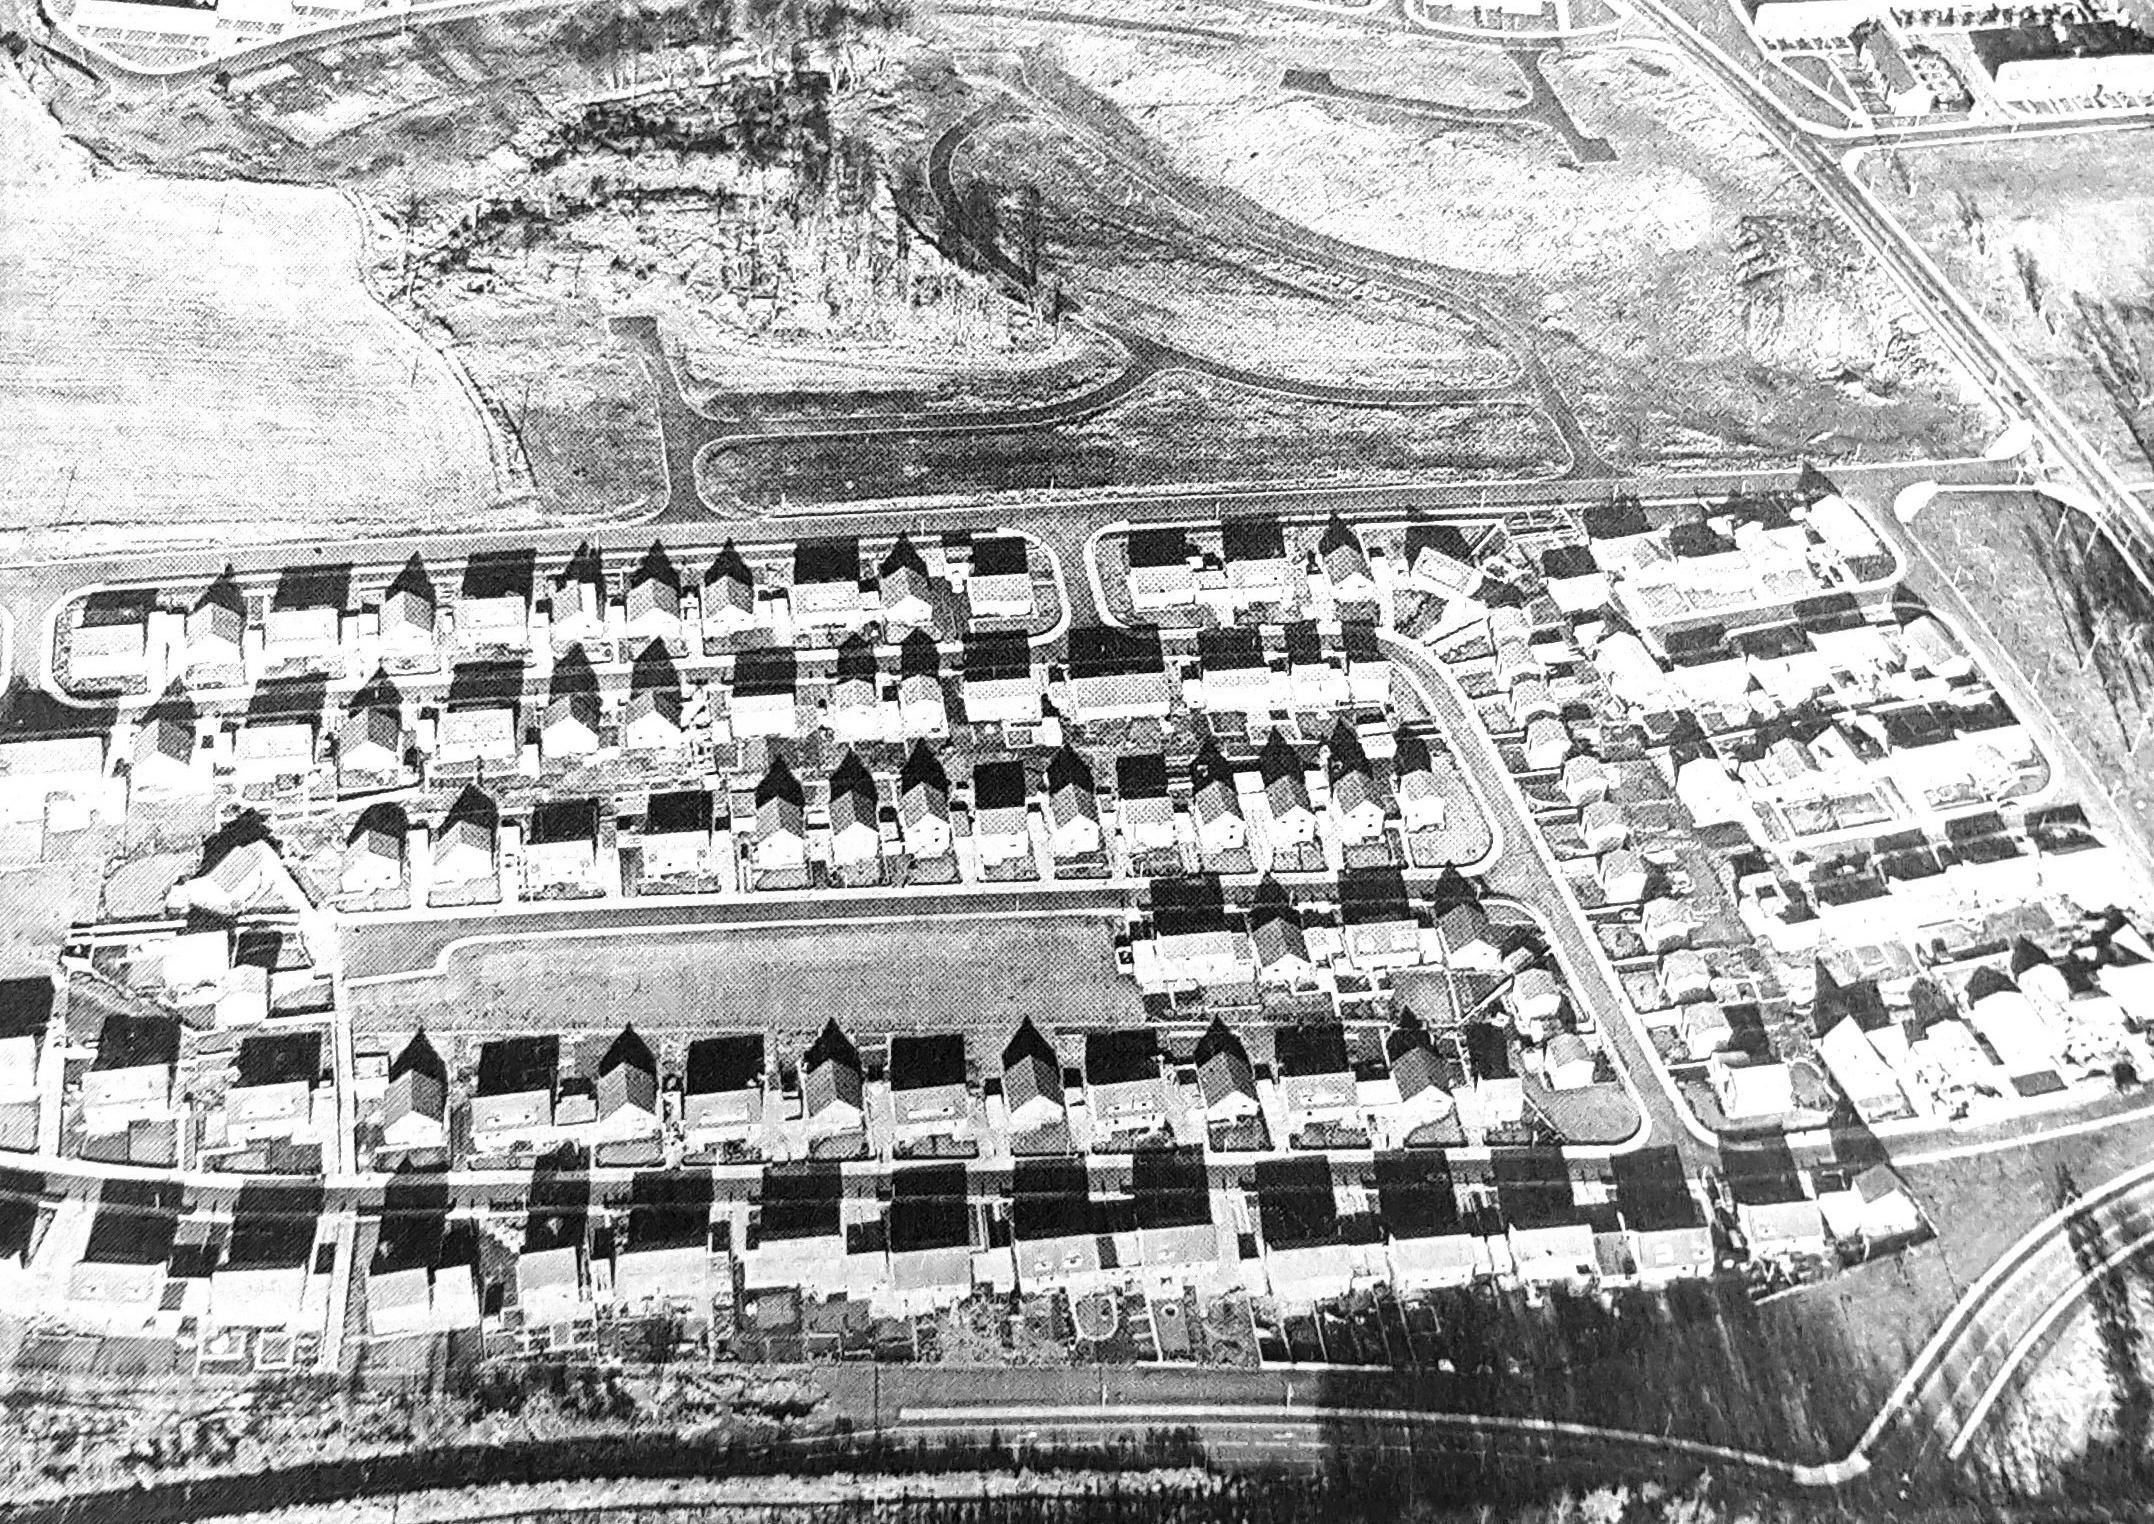 This shows the newly built Newliston housing estate at the west side of the town, with Torbain Road running along the bottom of the picture.